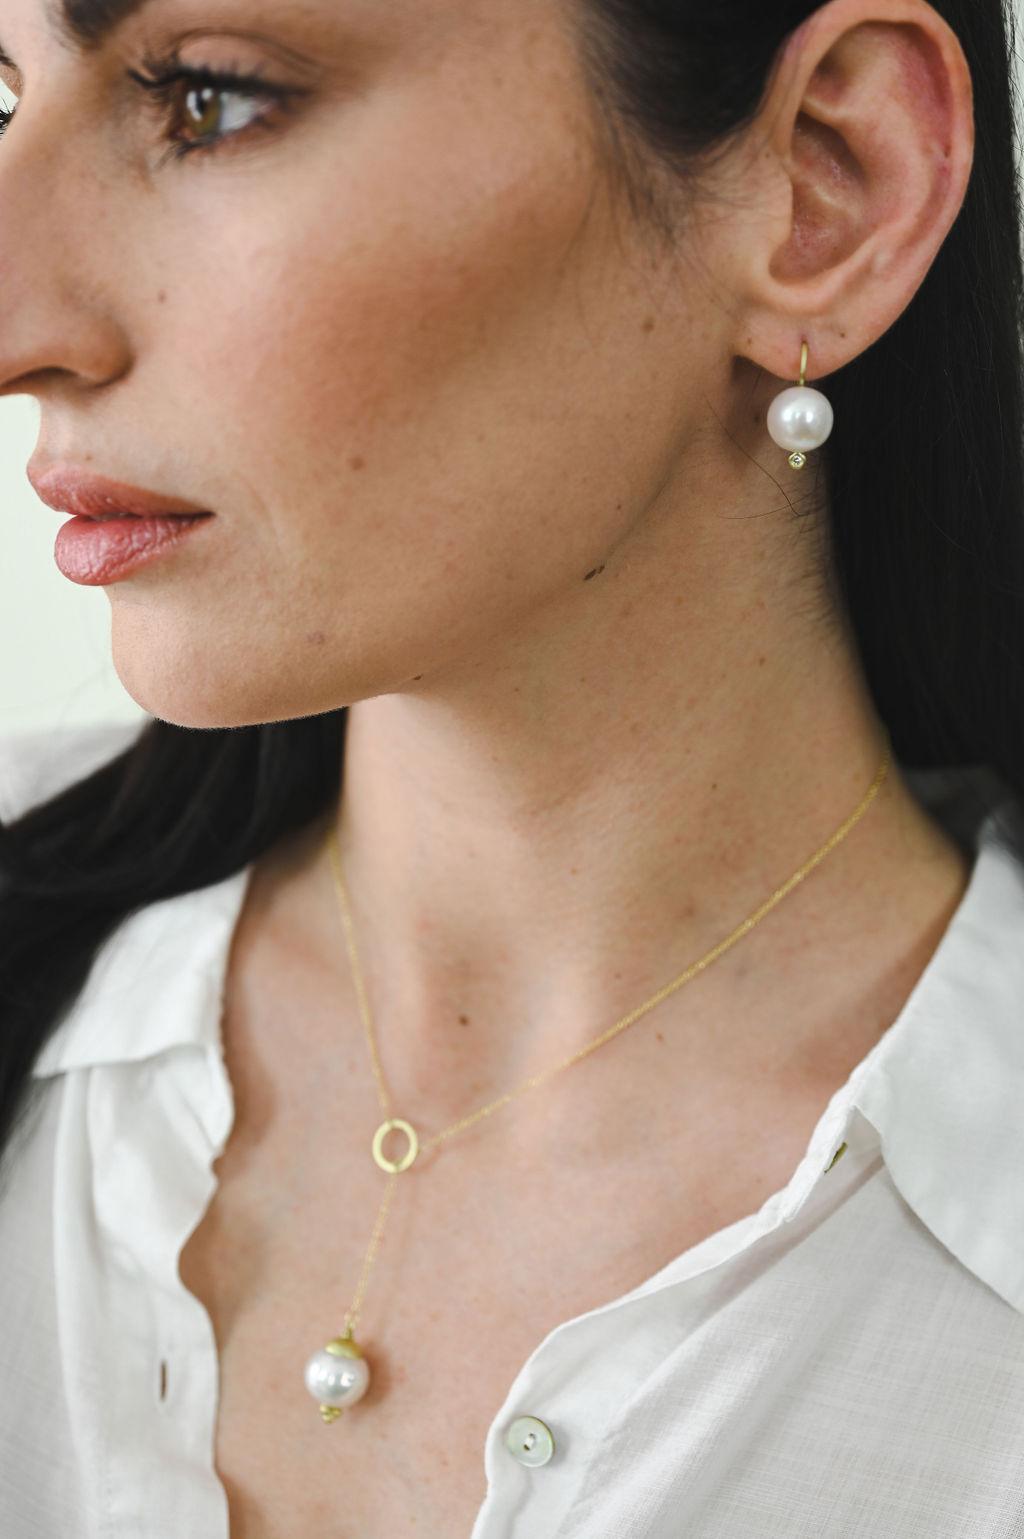 The absolute best go-to earring!  Faye Kim's White Freshwater Pearls on 18 karat gold ear wires feature a bright diamond at the earring base for a pretty pop of sparkle.

Diamonds .10 Carats tcw
White Freshwater Pearl 12-13mm
Length